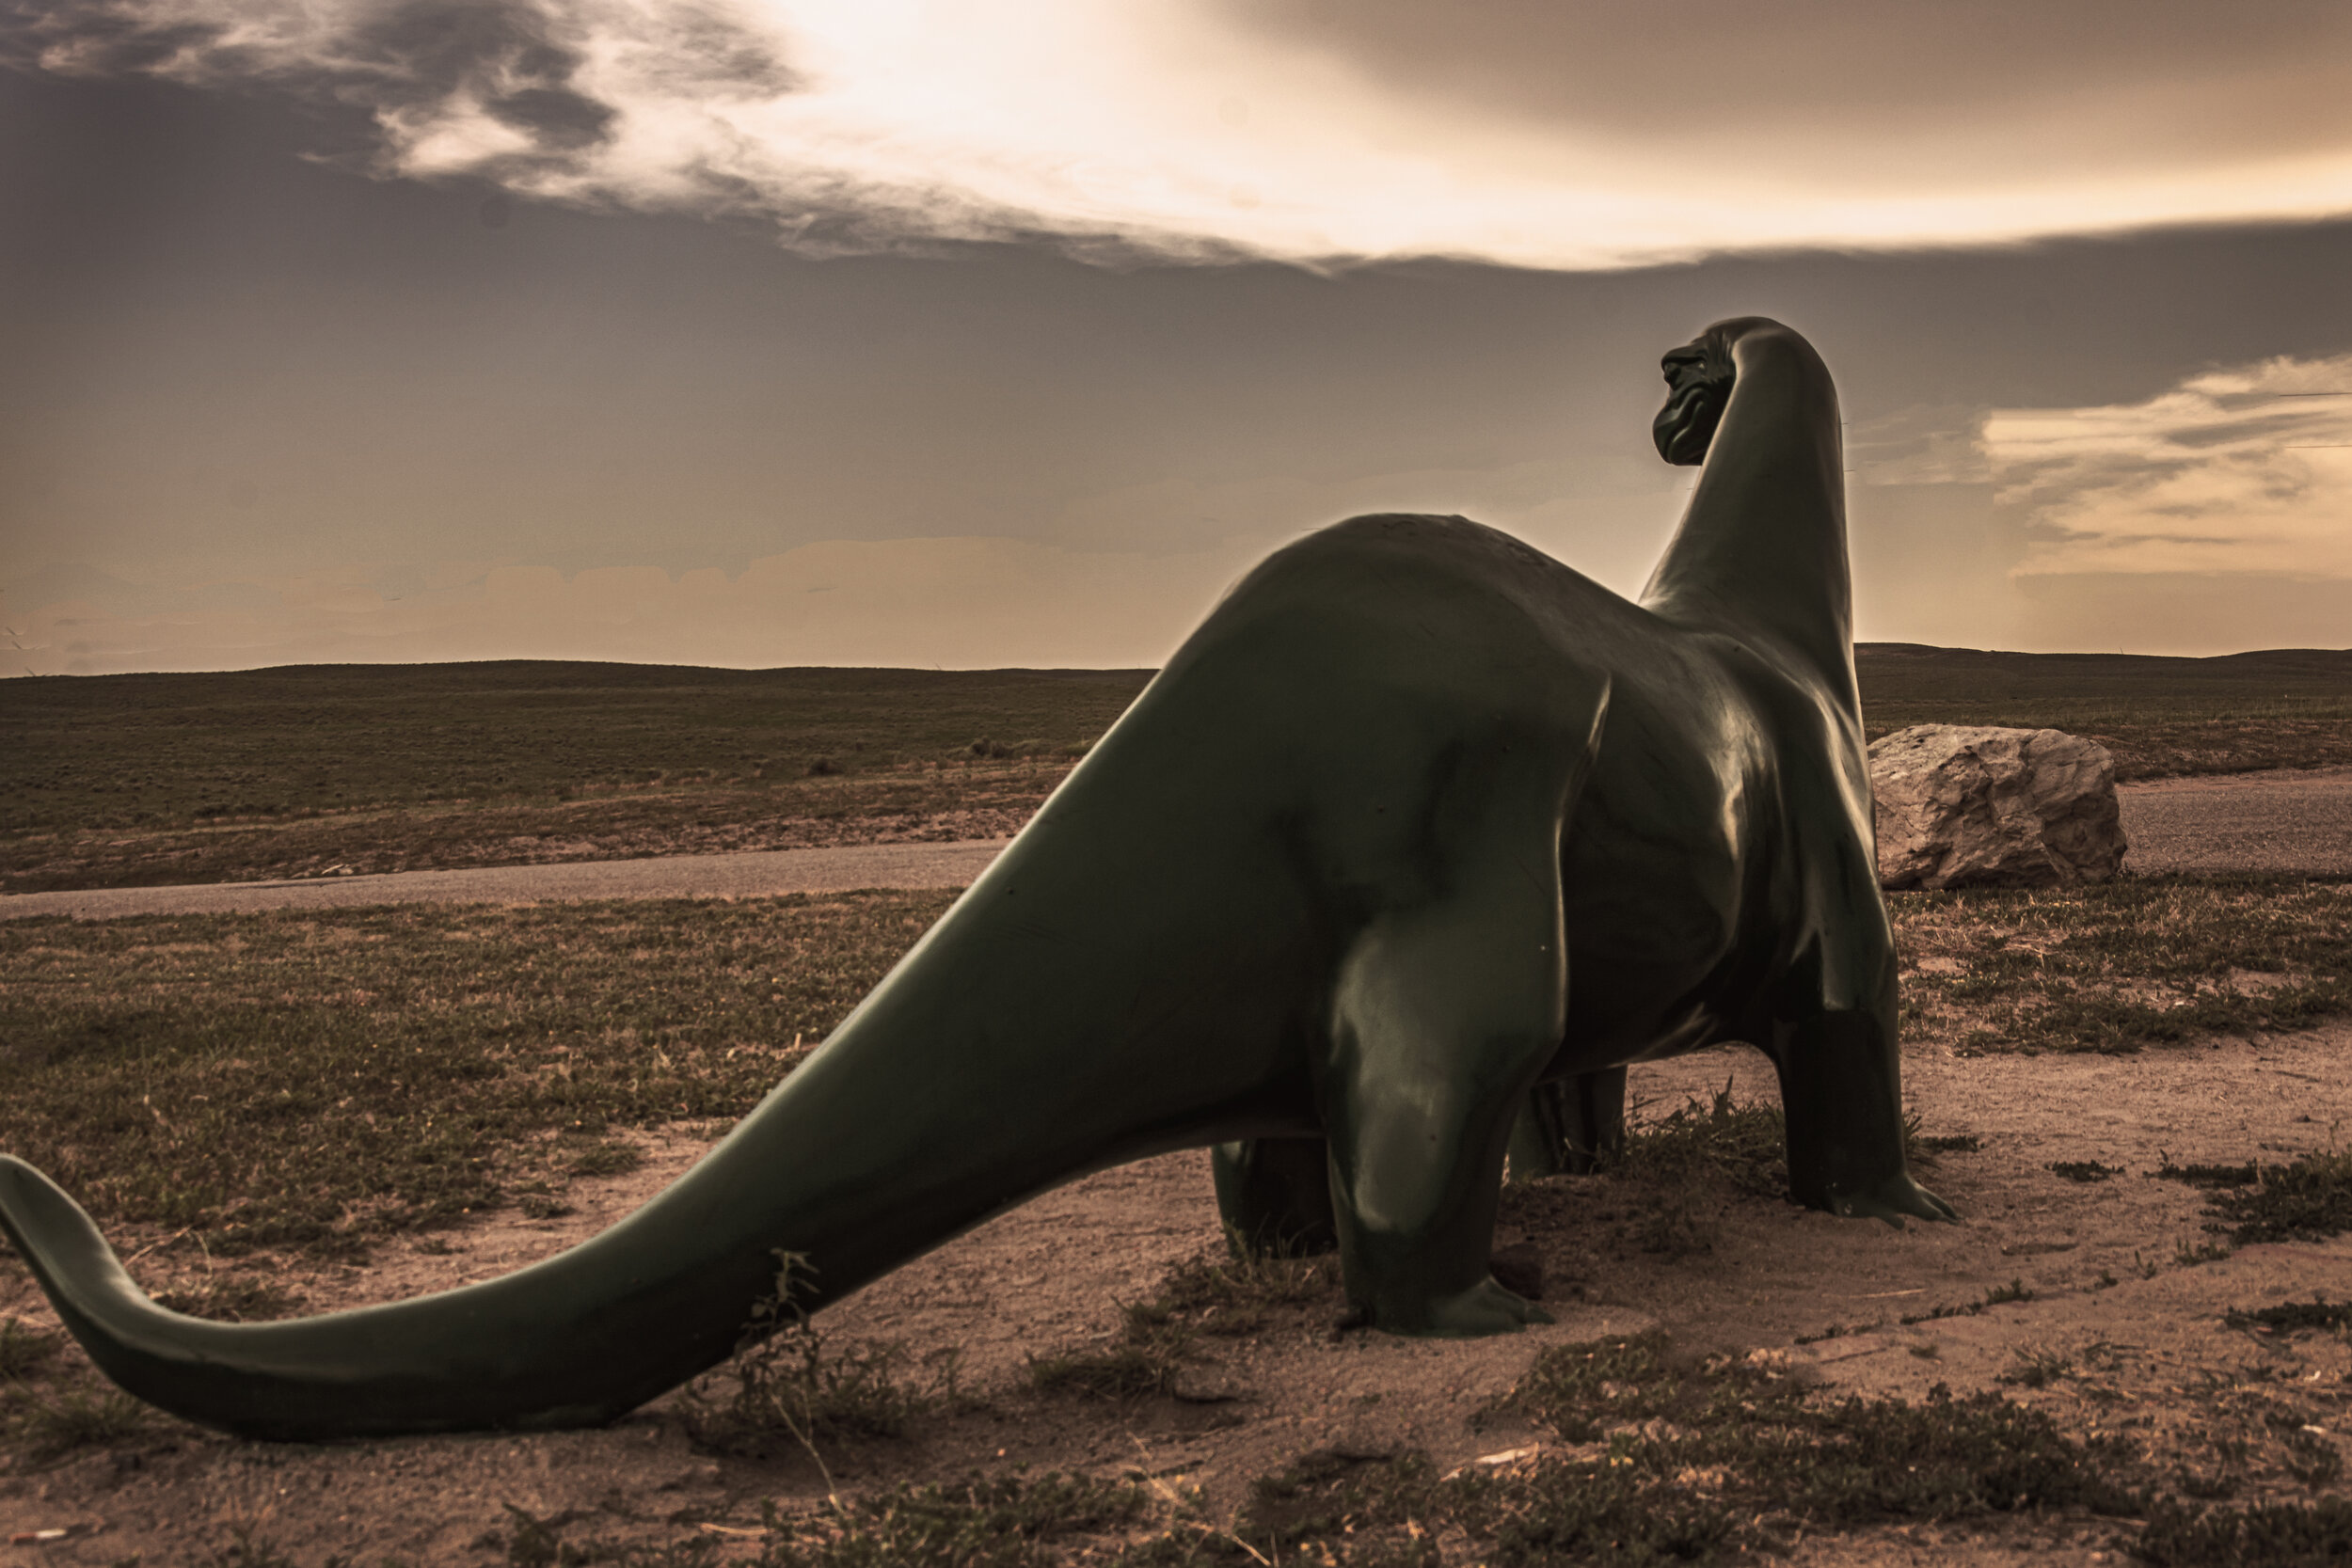  Sinclair dinosaur, color grading with Photoshop Lookup to give a realistic effect, eliminated fence in background 